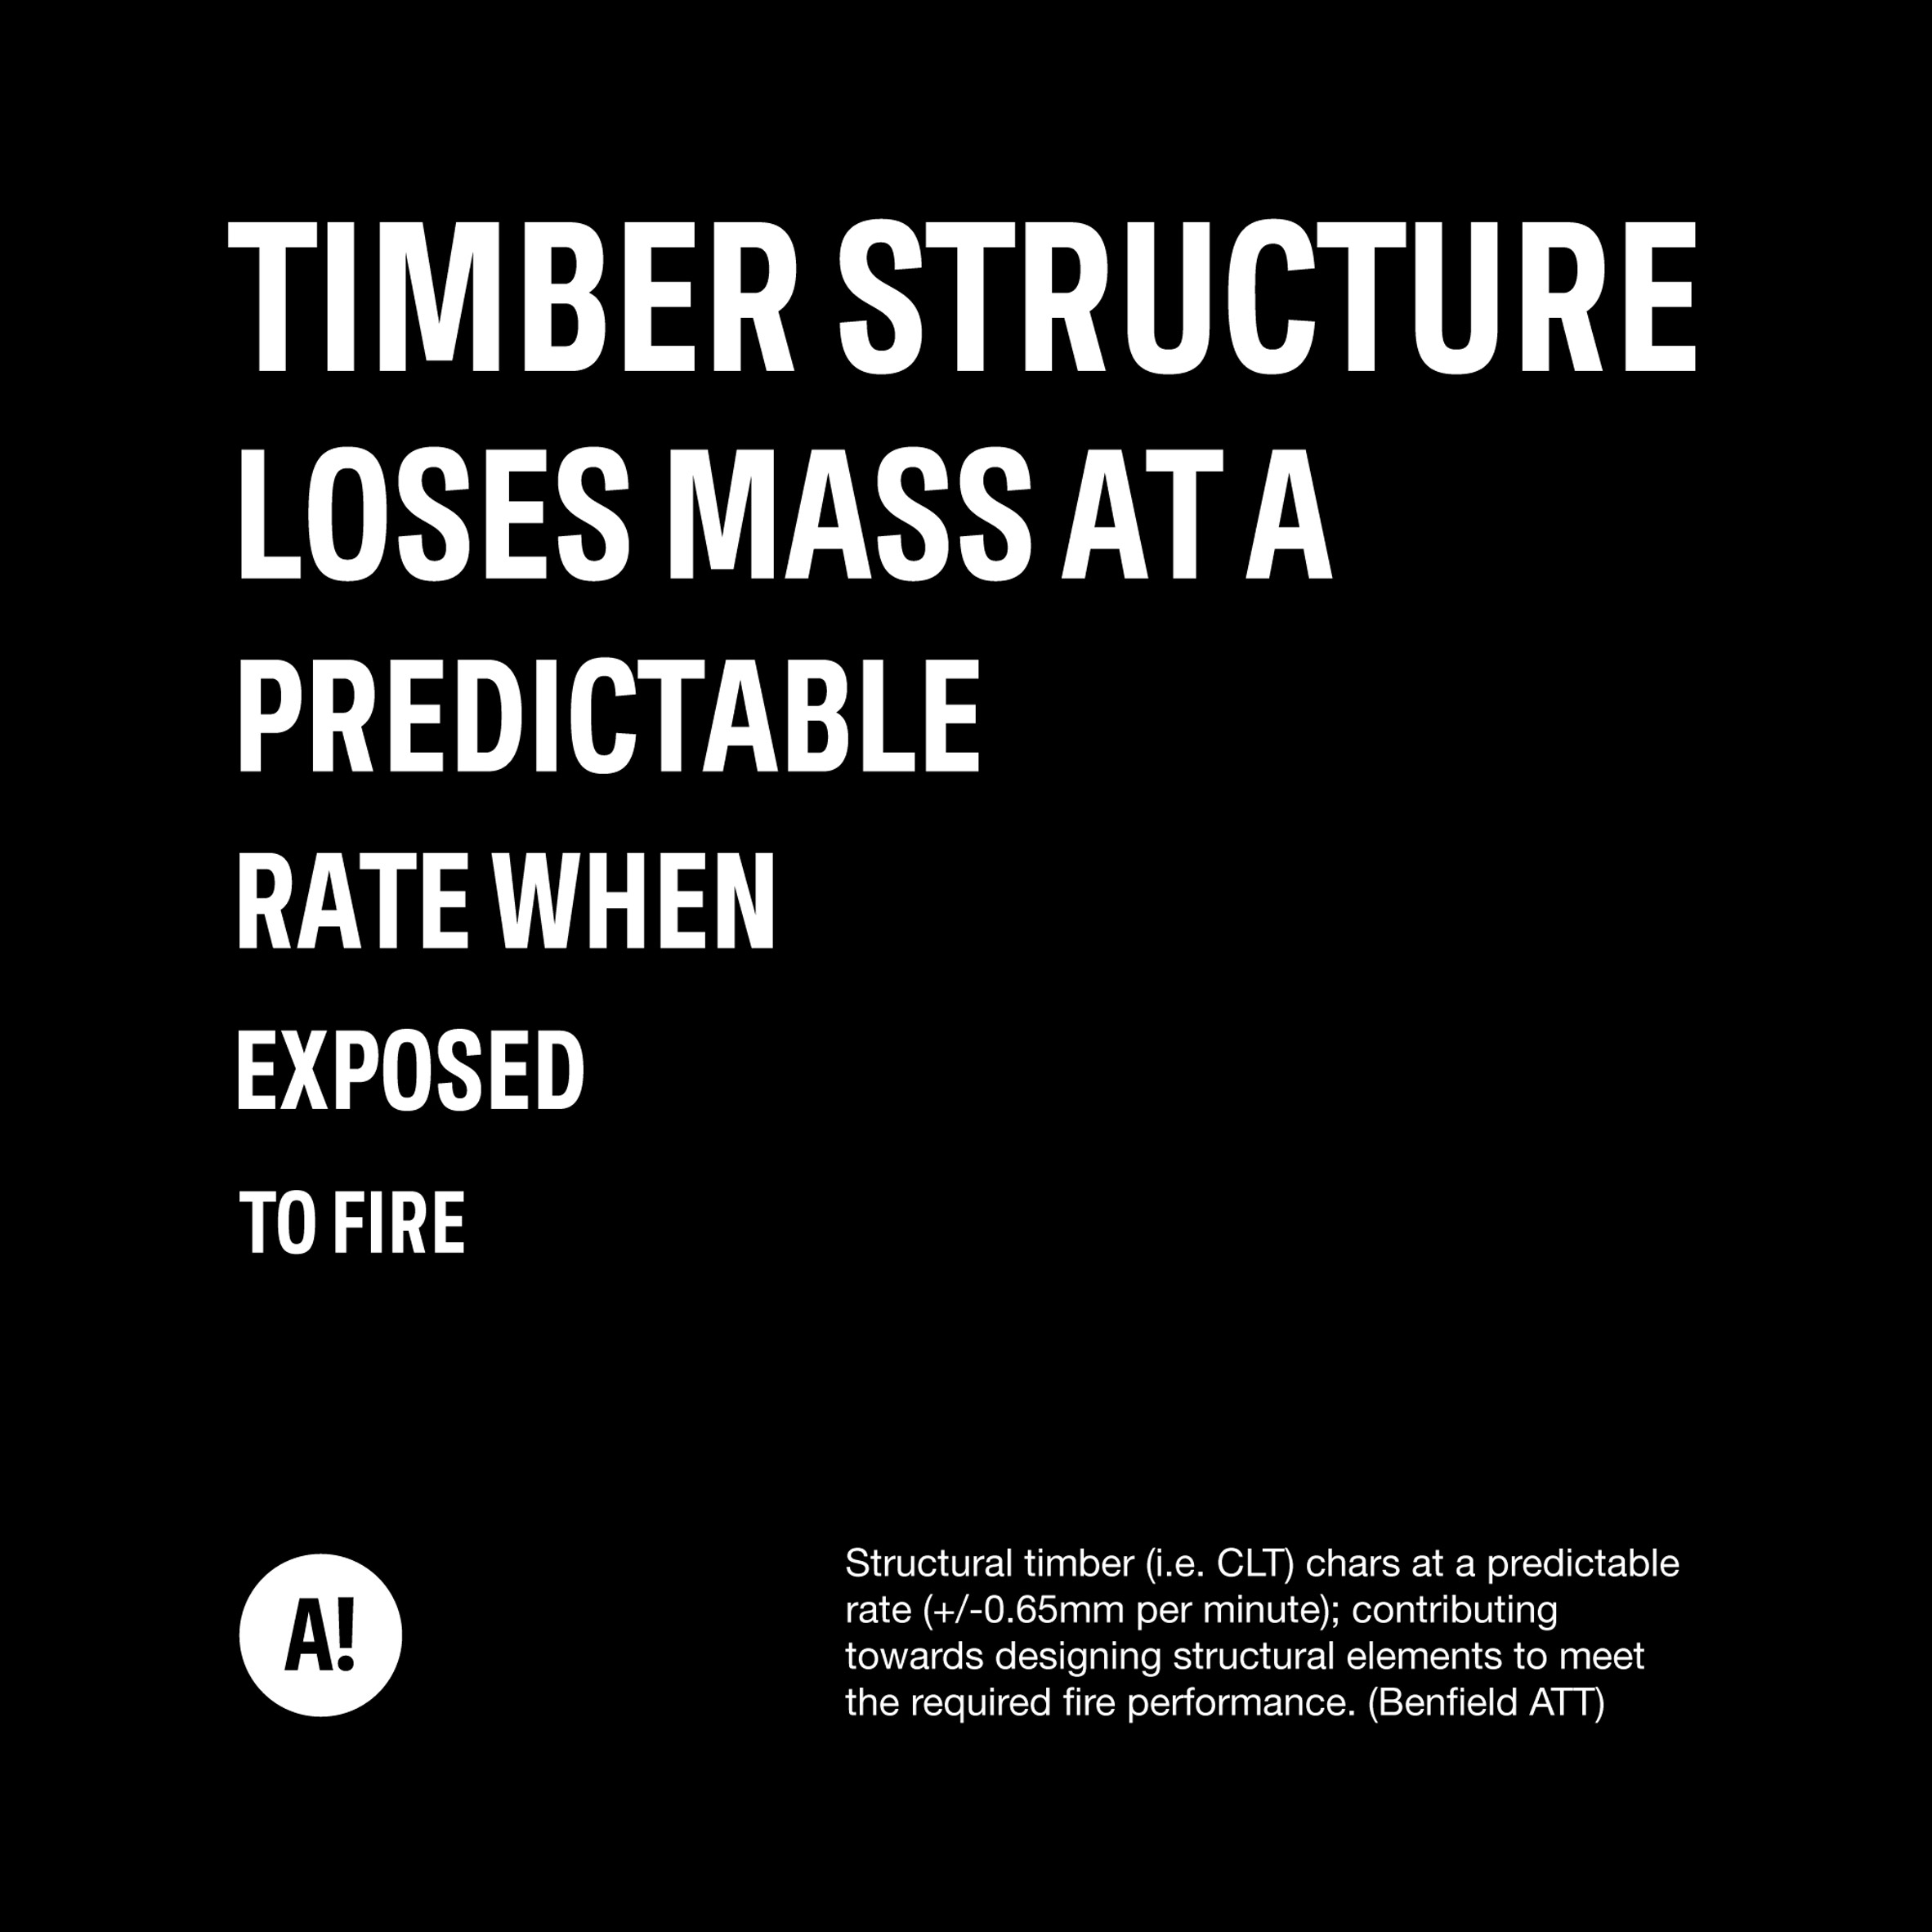 Architects Climate Action Network launches Save Safe Structural Timber campaign to save structural timber in UK